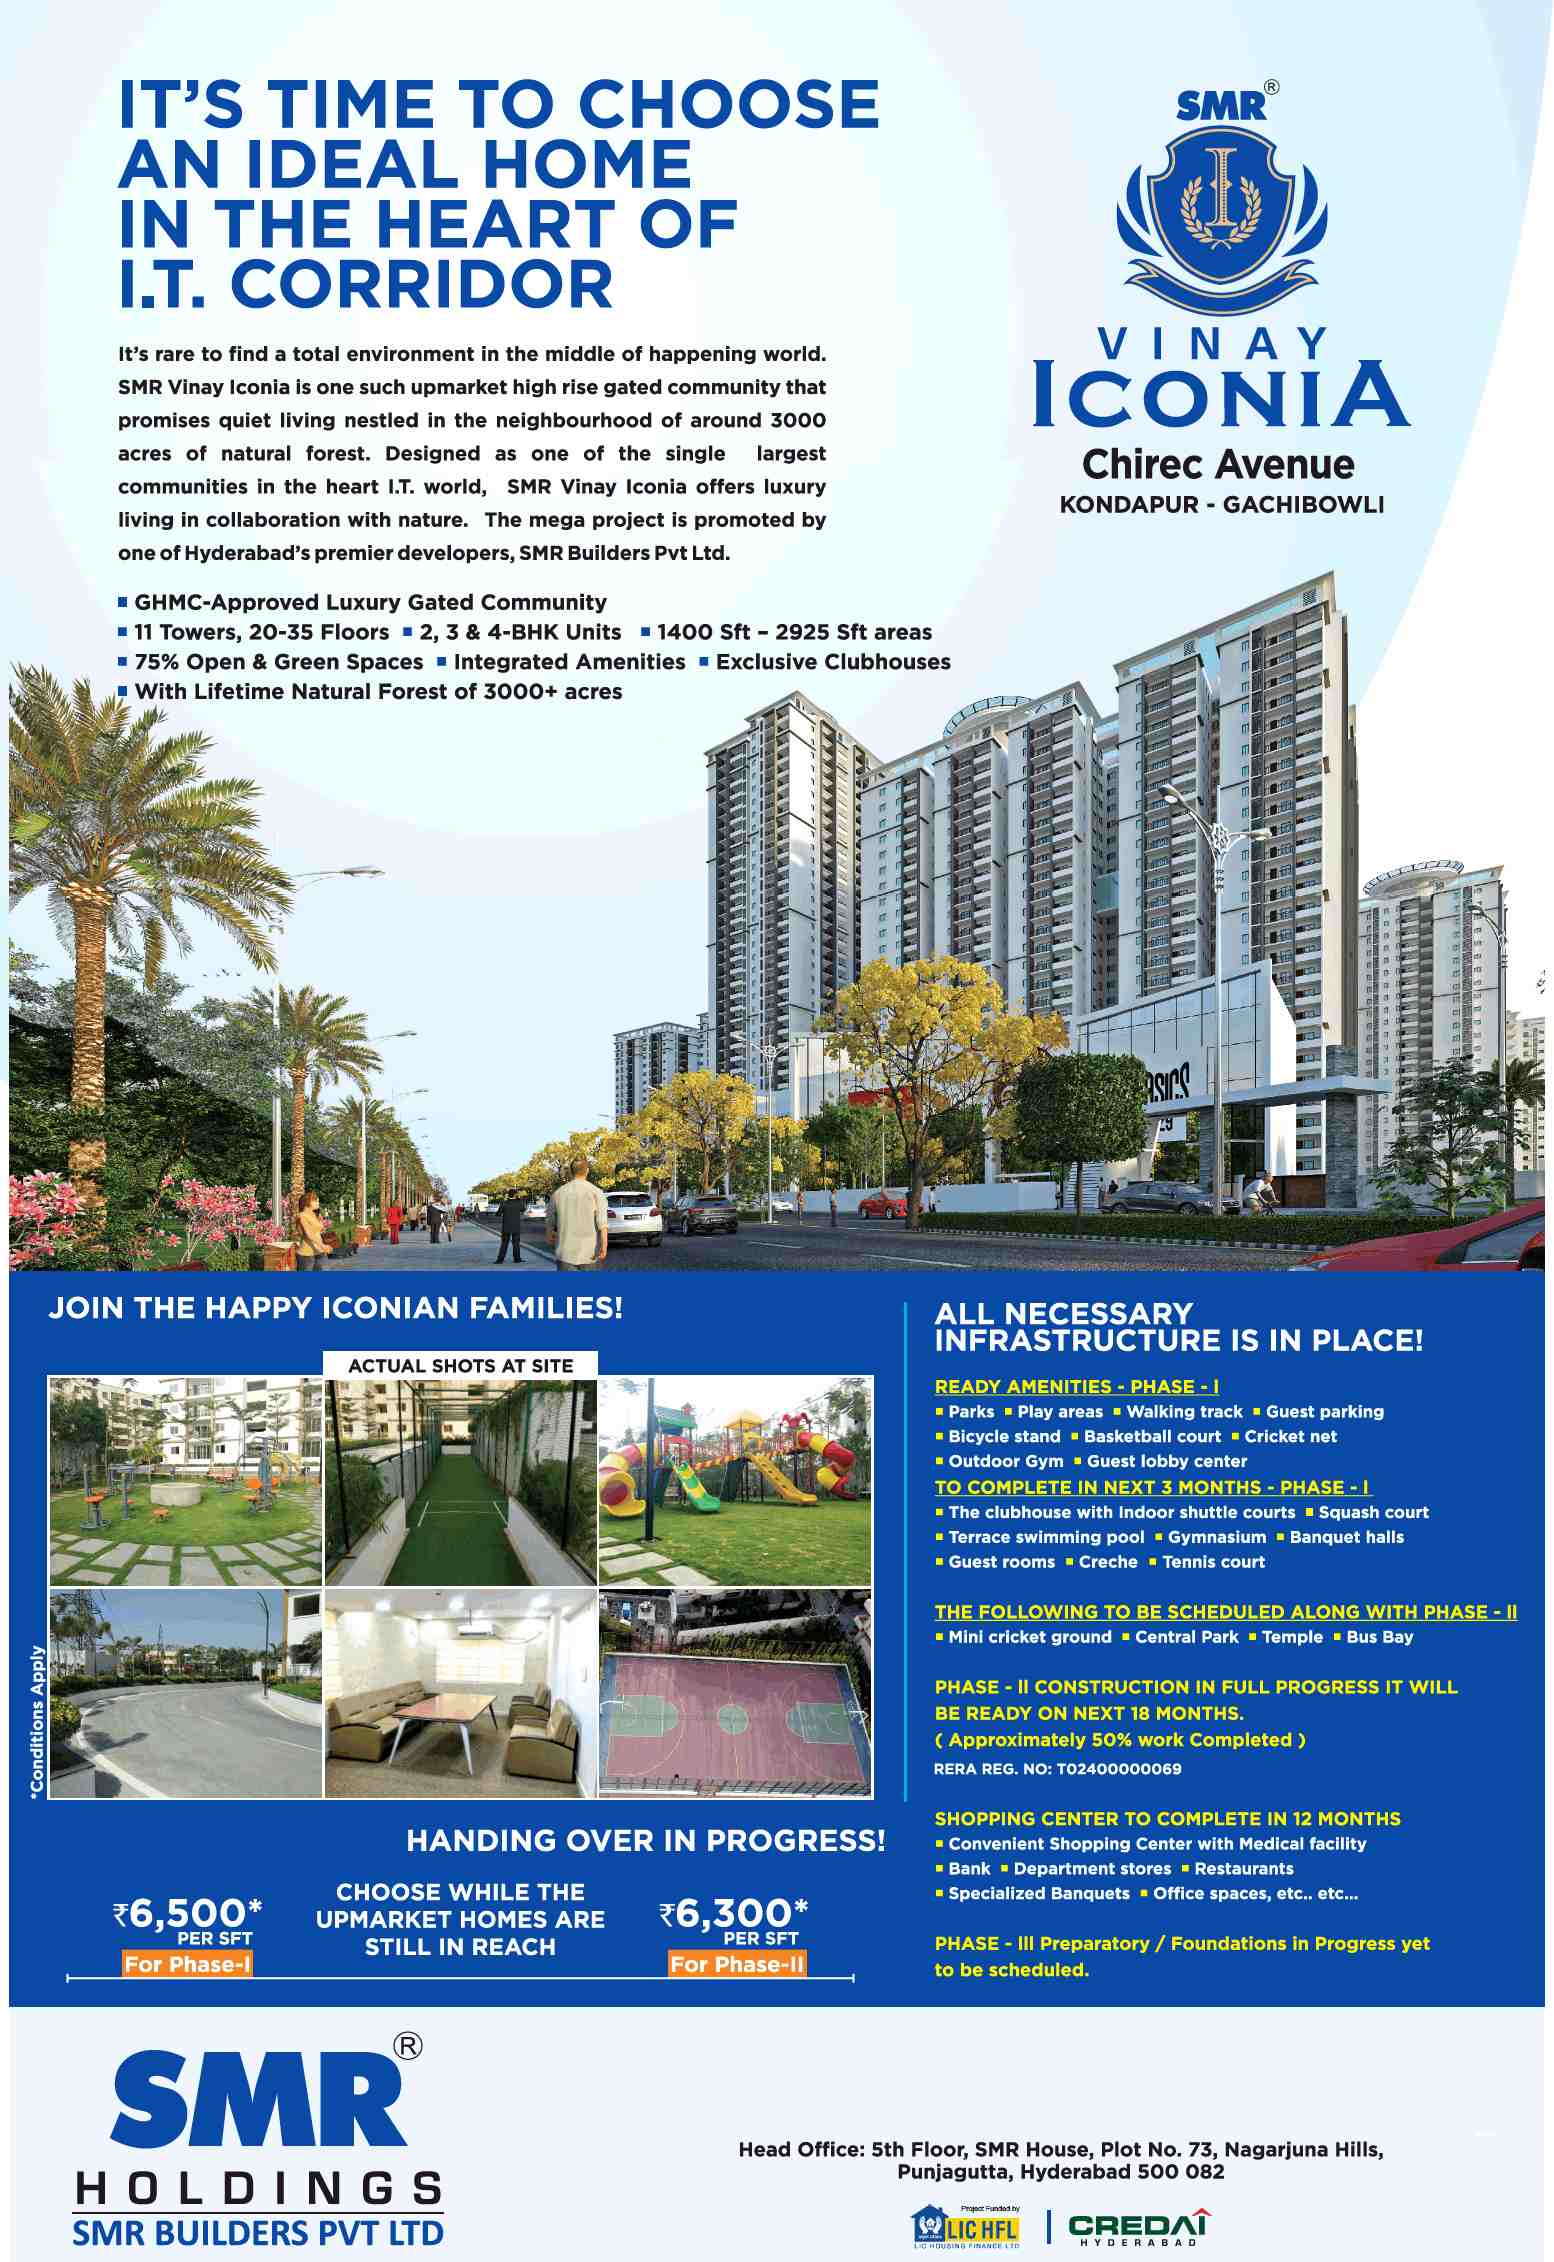 Join the happy iconian families at SMR Vinay Iconia, Hyderabad Update